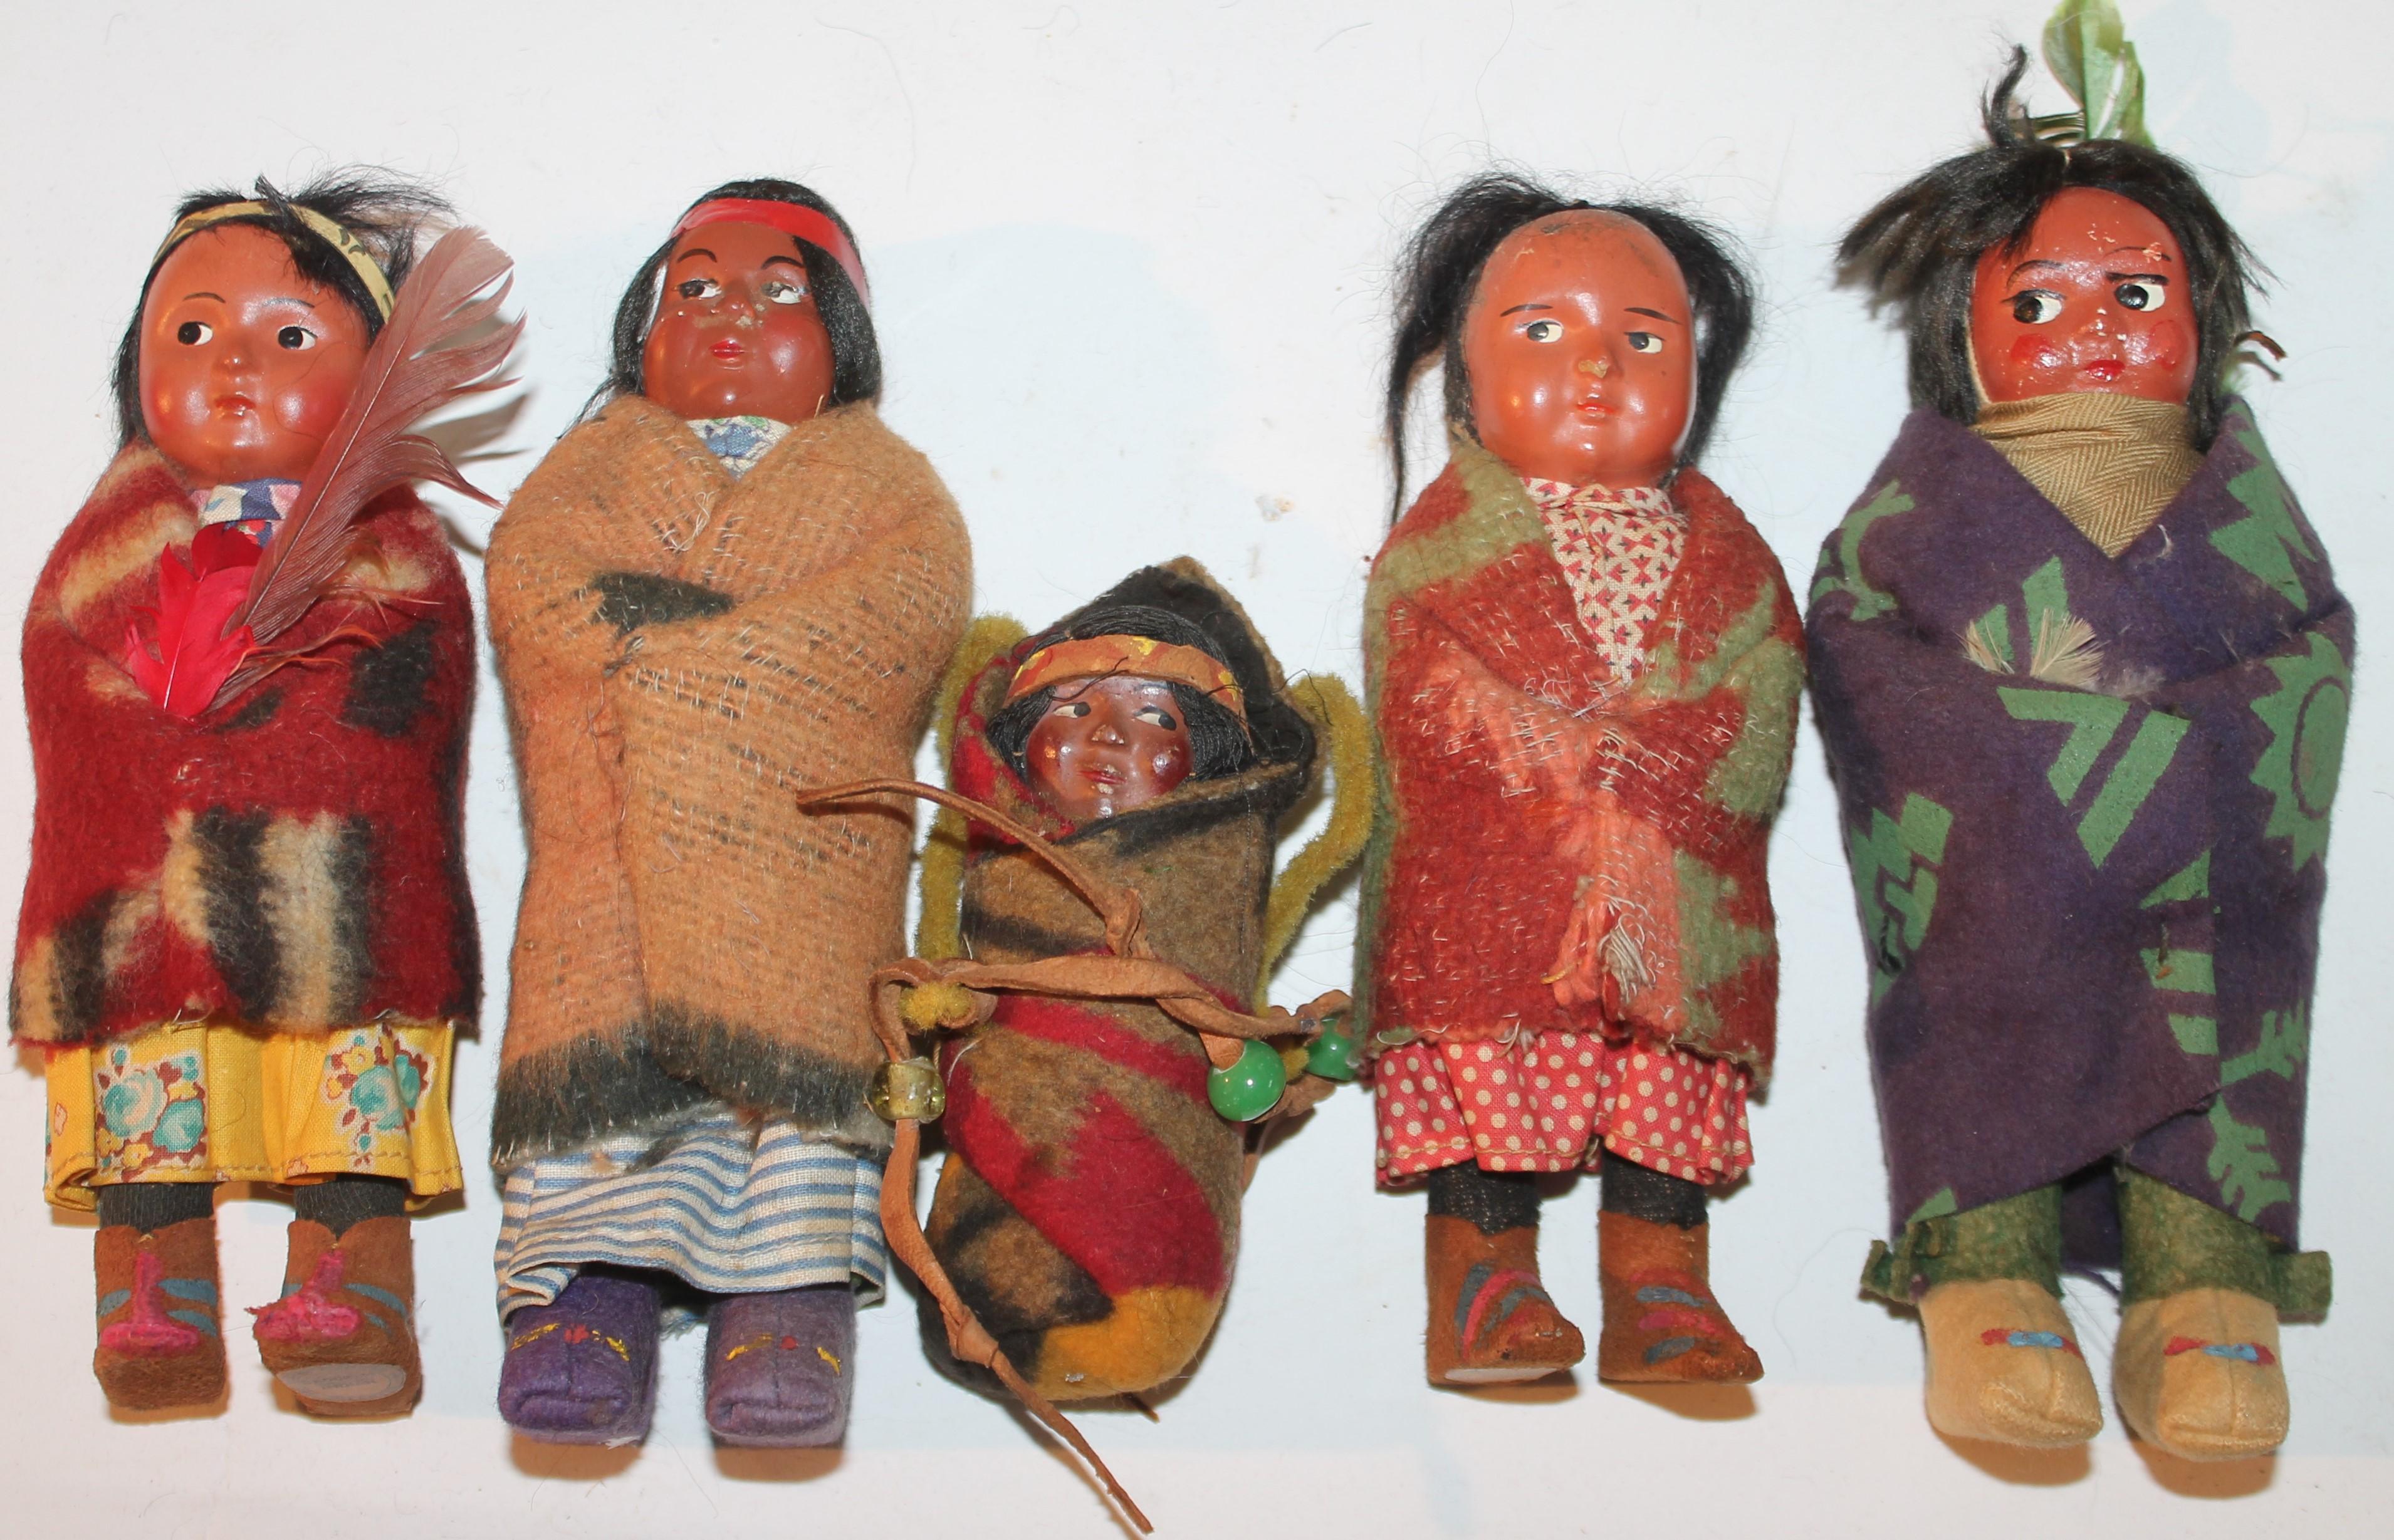 Set of five 1930's - 40's children skookum dolls. The Dolls have Real Hair and are Wearing Indian Design Beacon Blankets.
Largest measures - 7.5 tall x 2.75 wide
smallest measures - 4.5 tall x 2 wide.